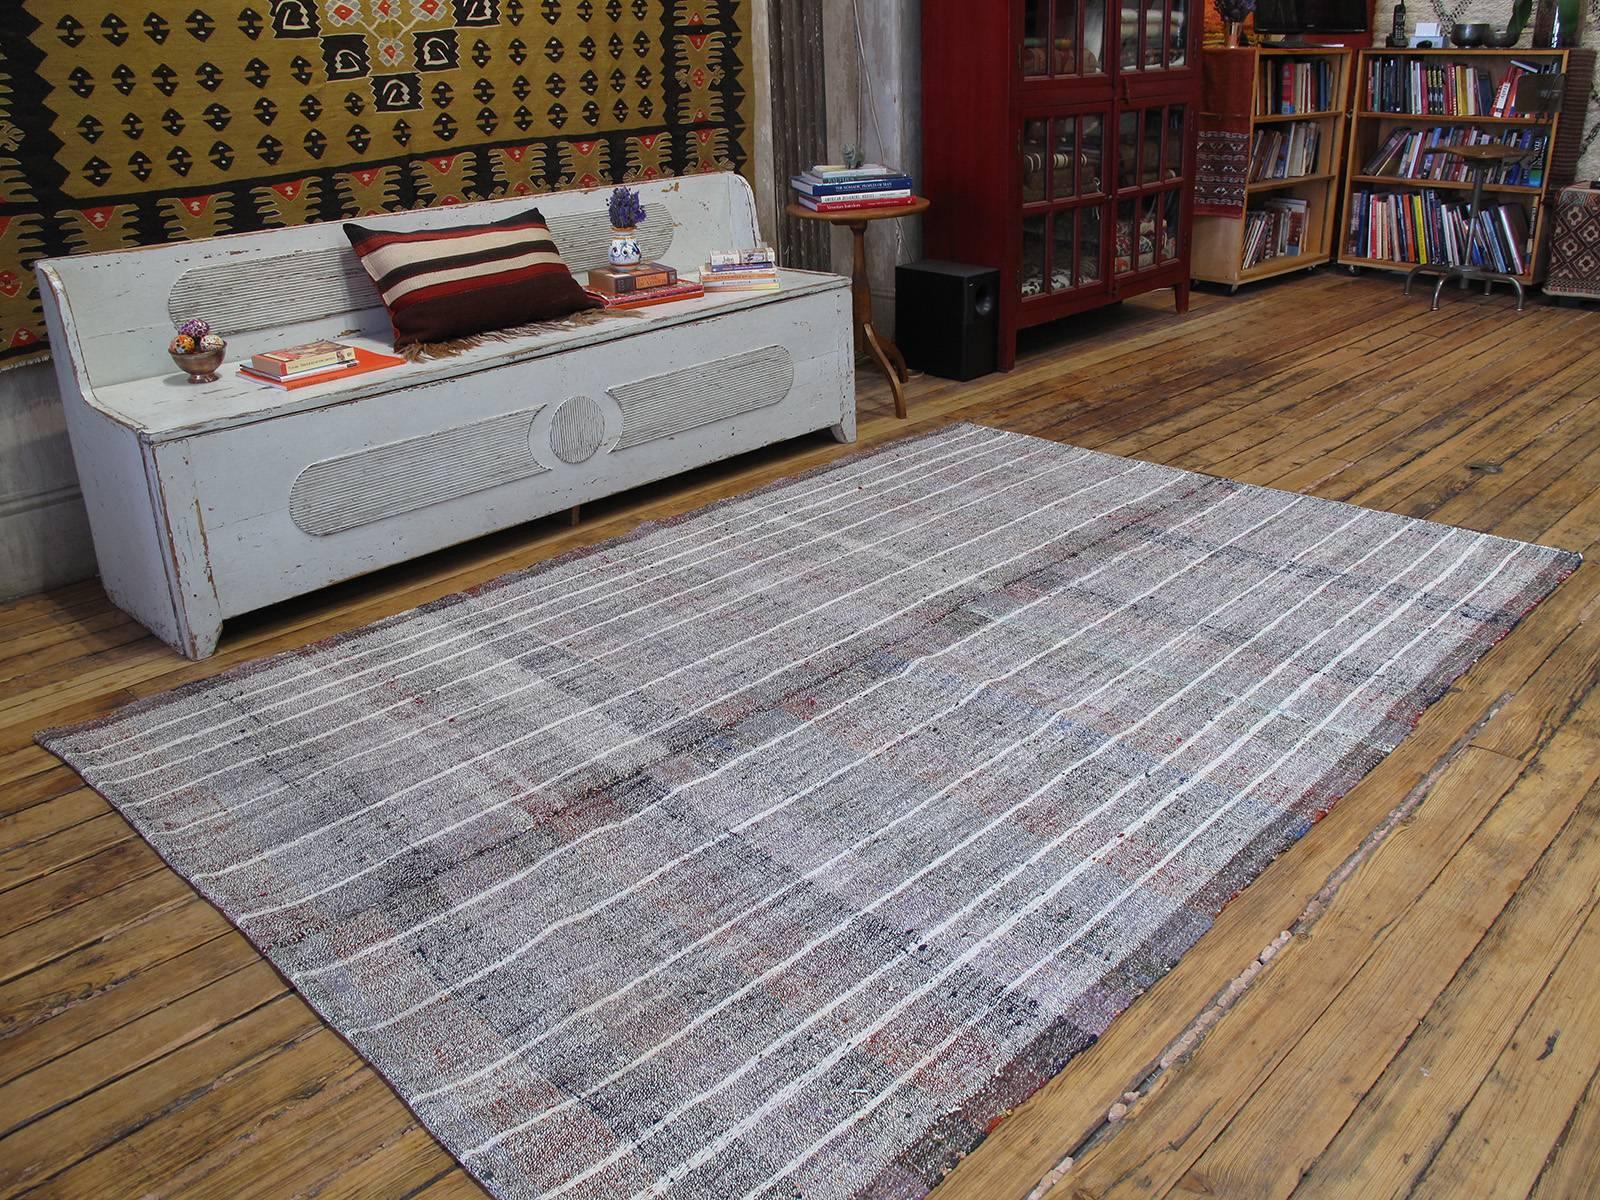 A simple tribal flat-weave from Southeastern Turkey, woven with an ingenious mixture of cotton and goat hair, to serve as a utilitarian floor cover in the weaver's household. Note the use of colorful cotton rag wefts throughout. With its authentic